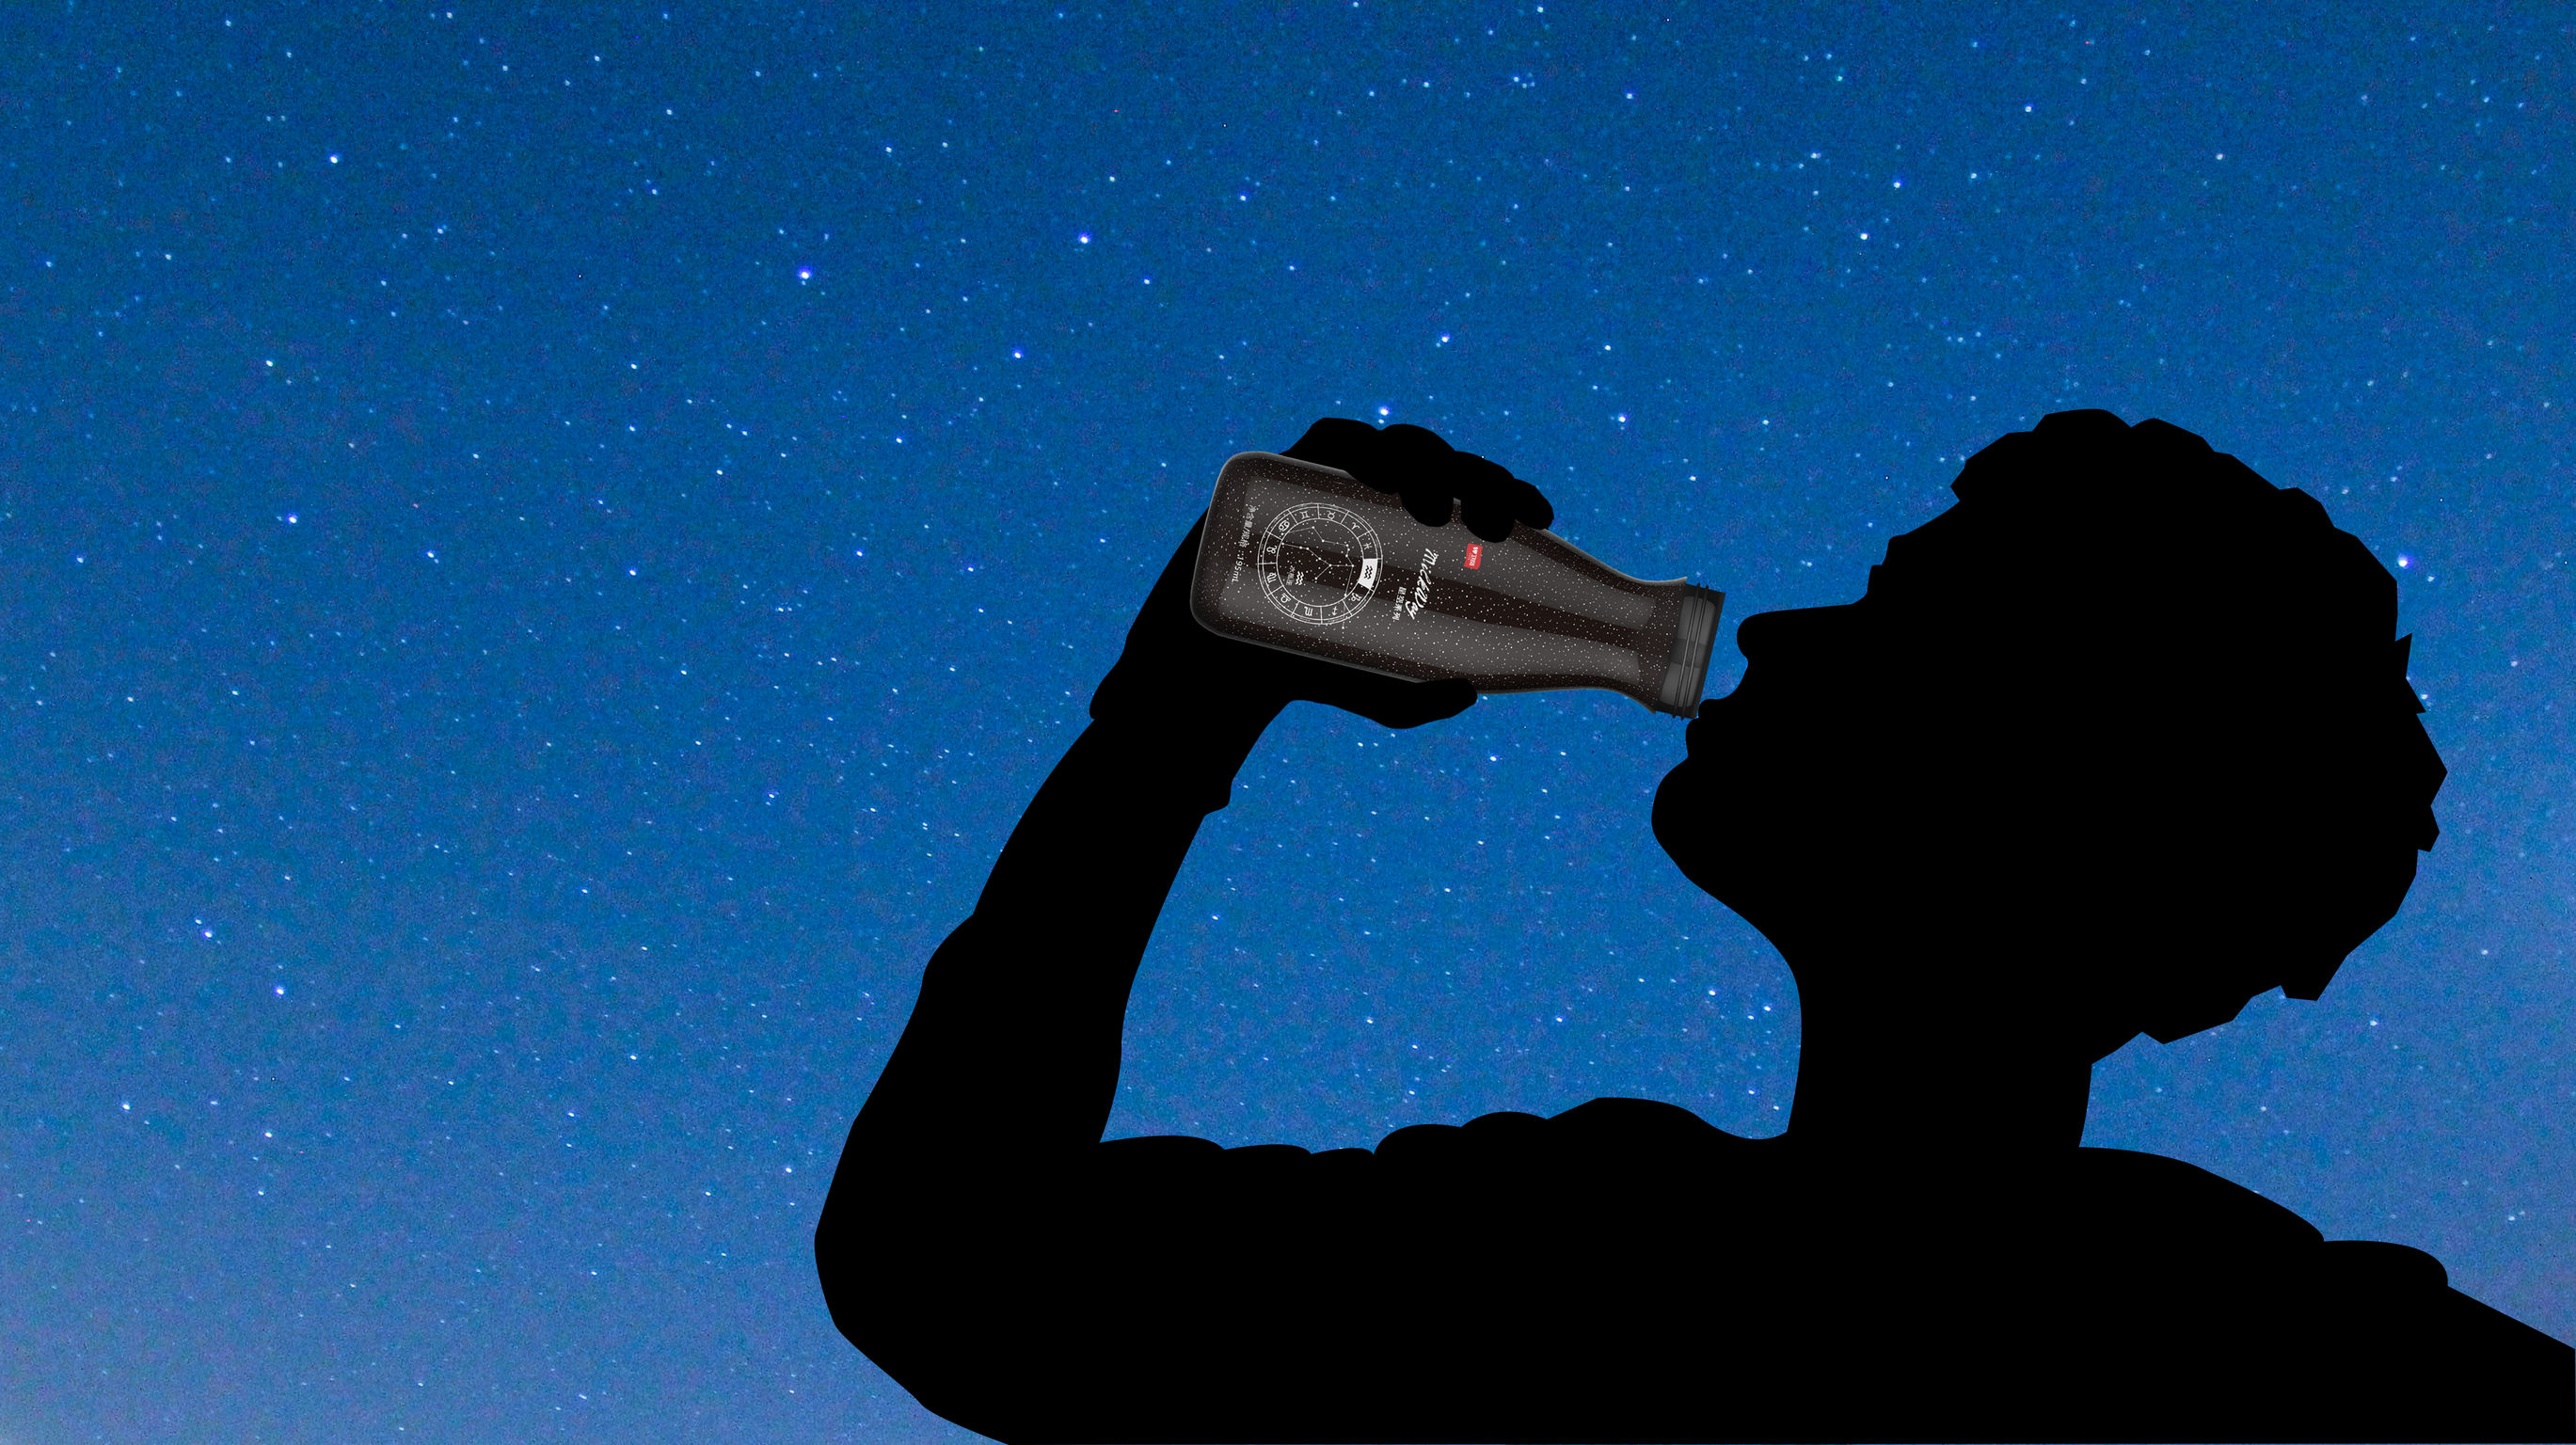 Milk packaging & starry sky Projection